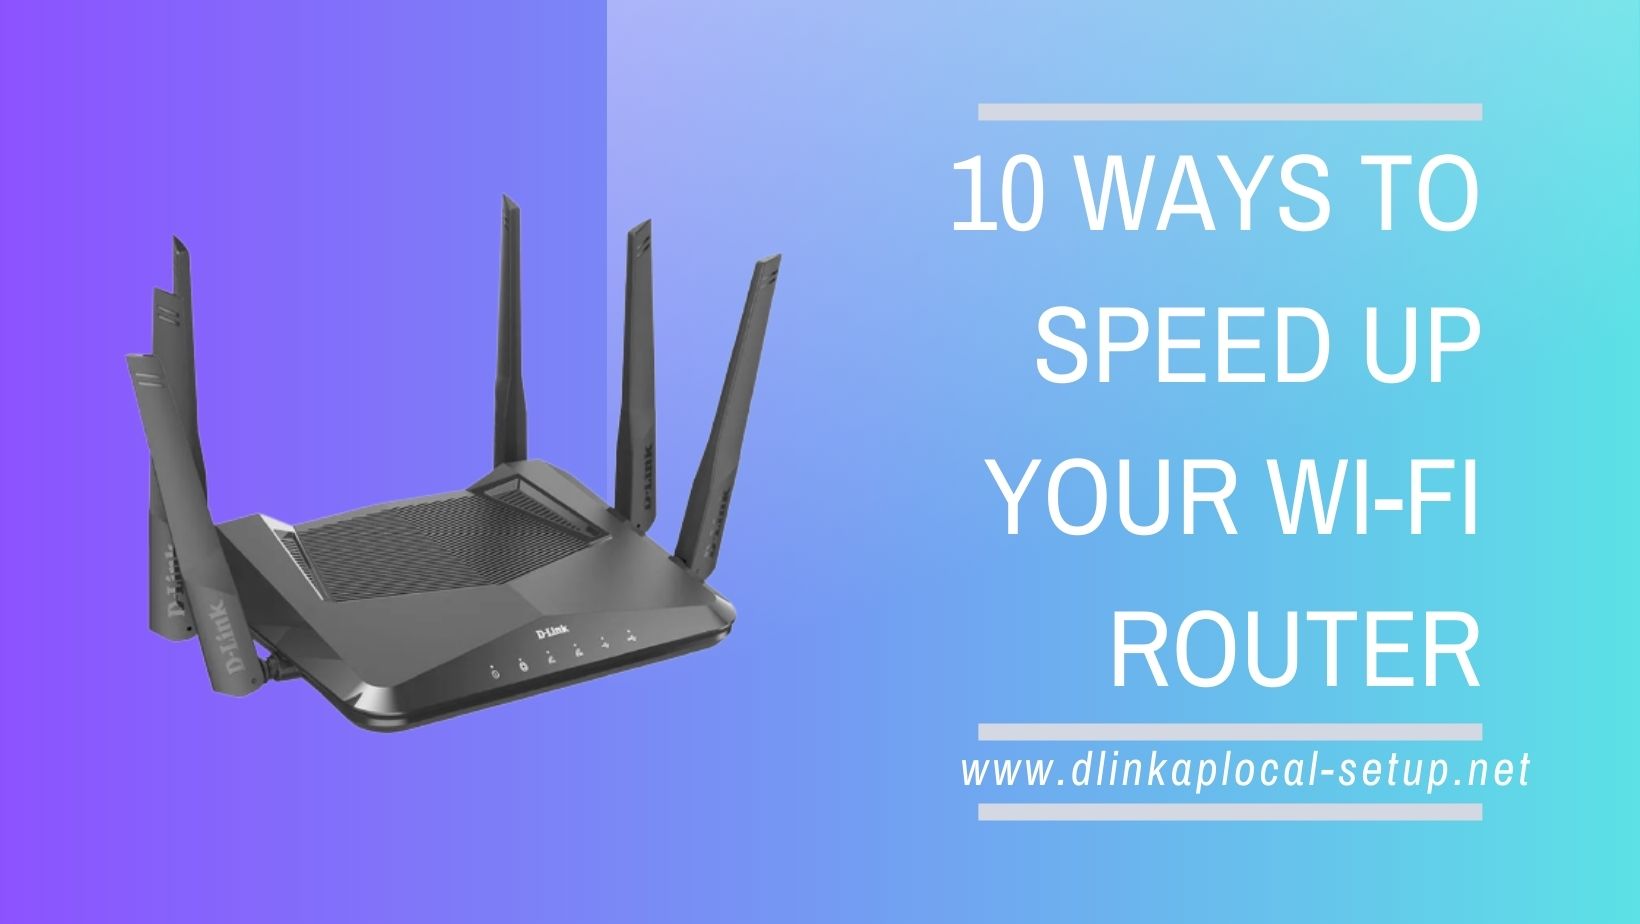 10 Ways To Speed Up Your Wi-Fi Router